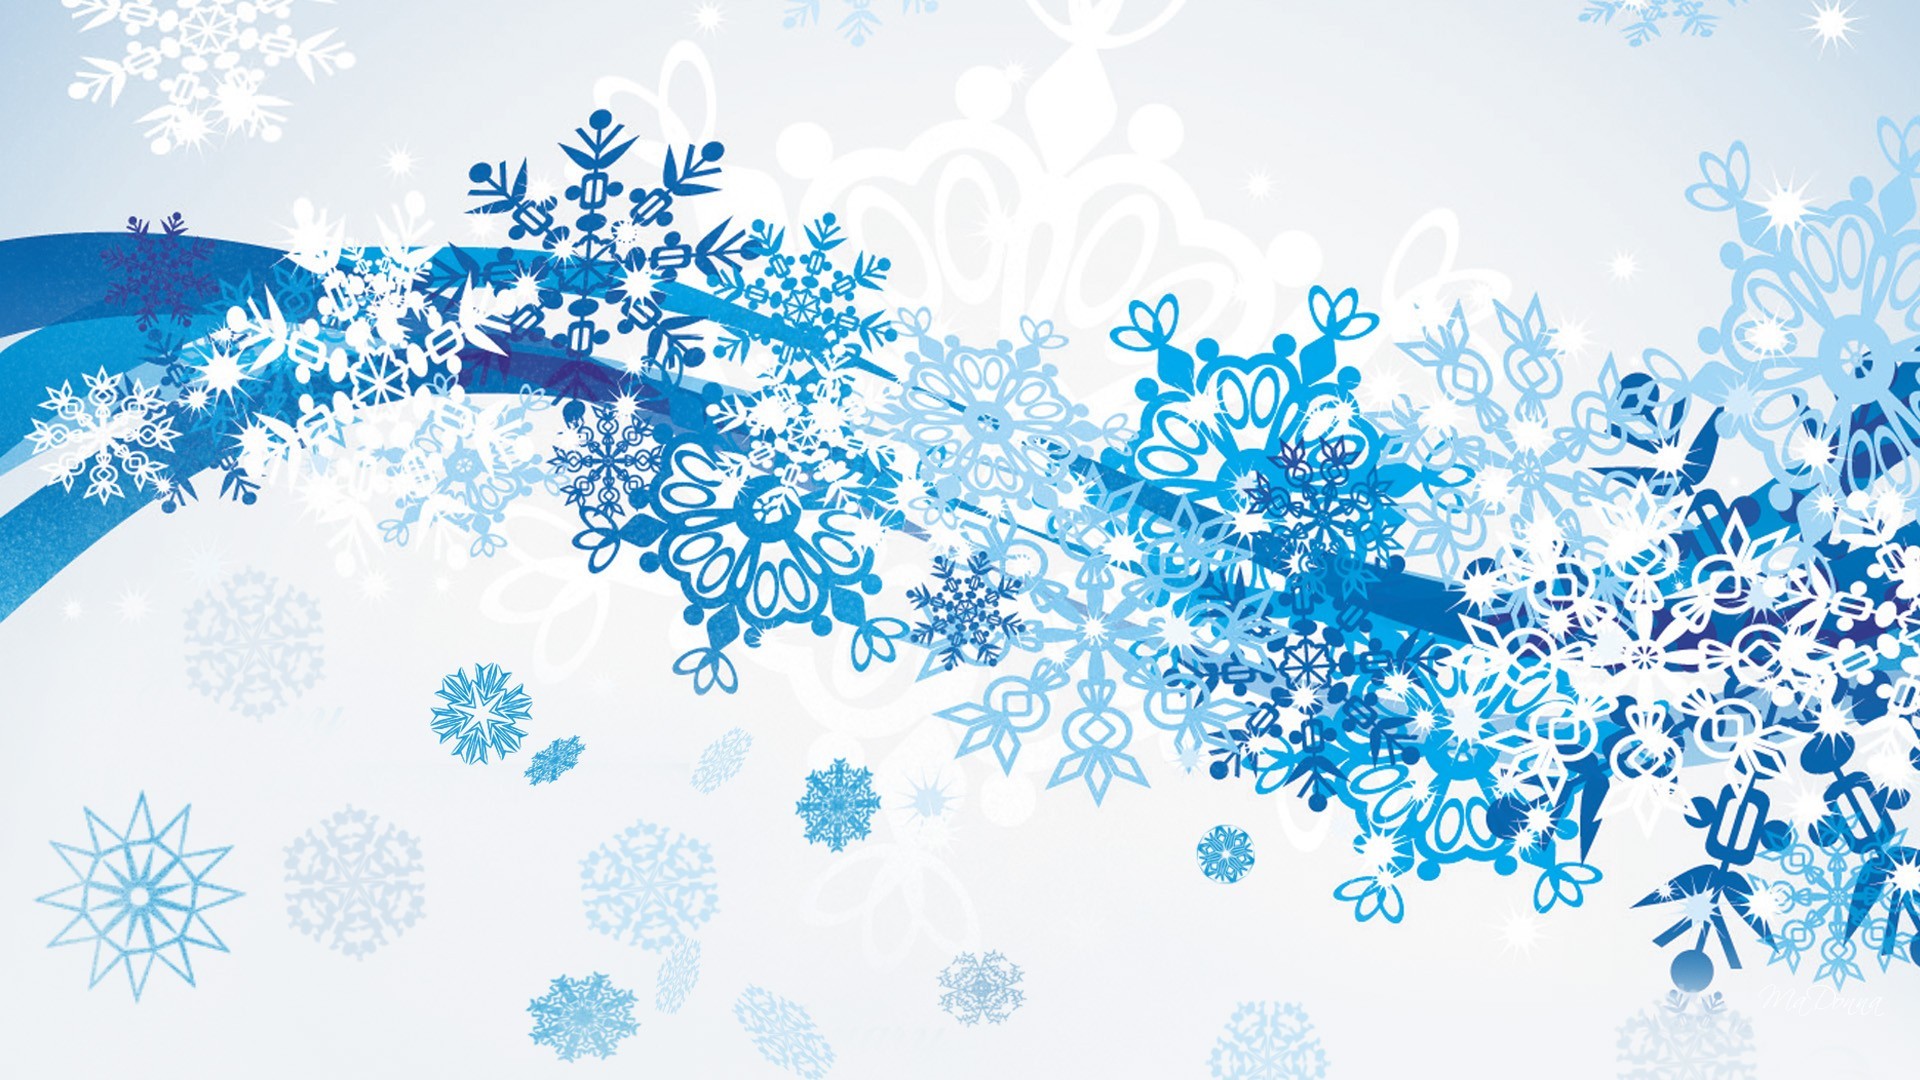 1920x1080 Newest Snowflake Photos and Pictures, Snowflake HQFX Wallpapers